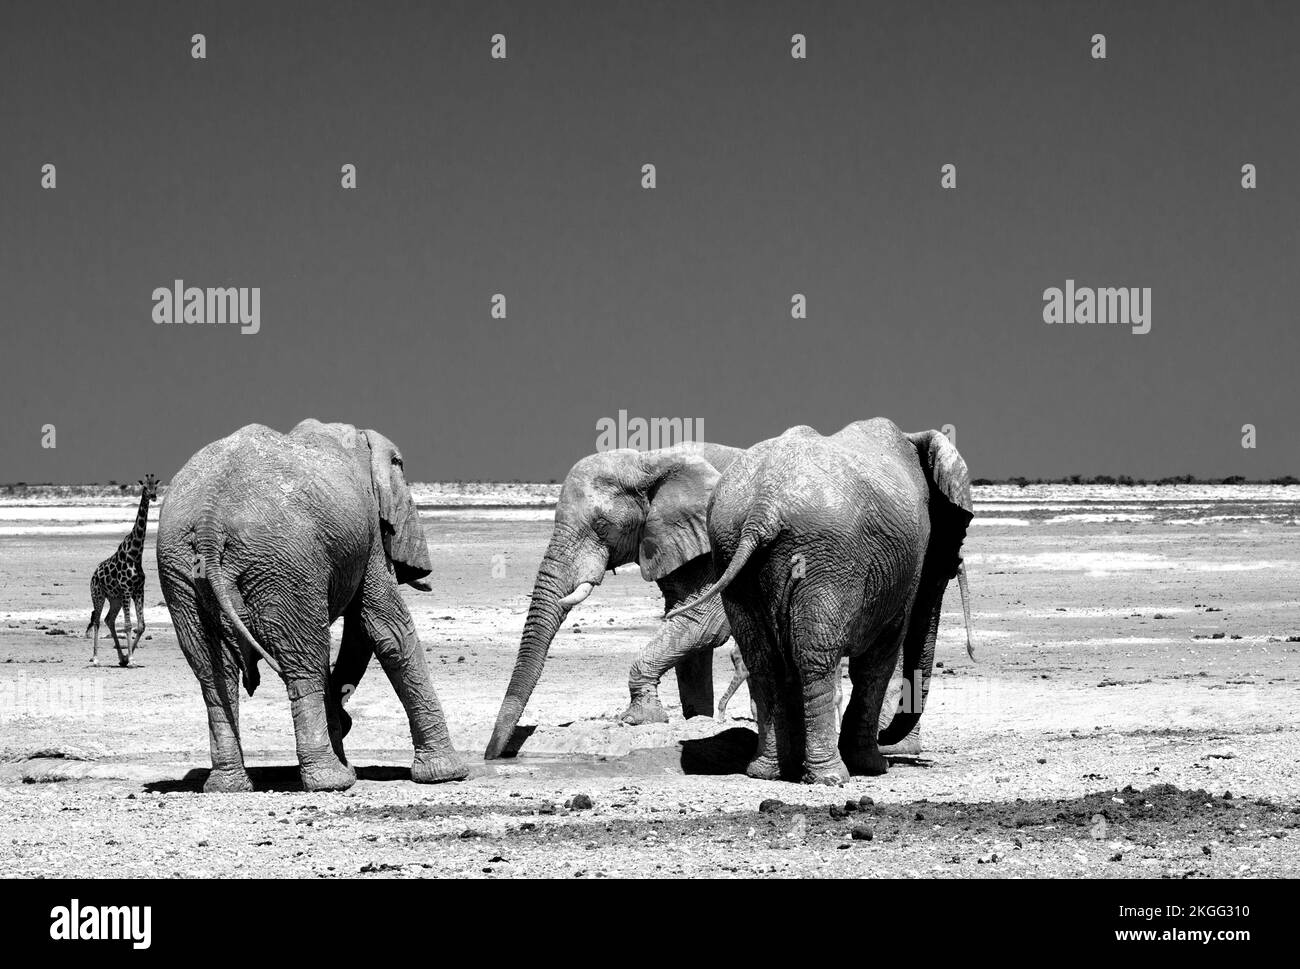 Three Bull African Elephants stand near a small waterhole, while a lone giraffe looks on in the background Stock Photo